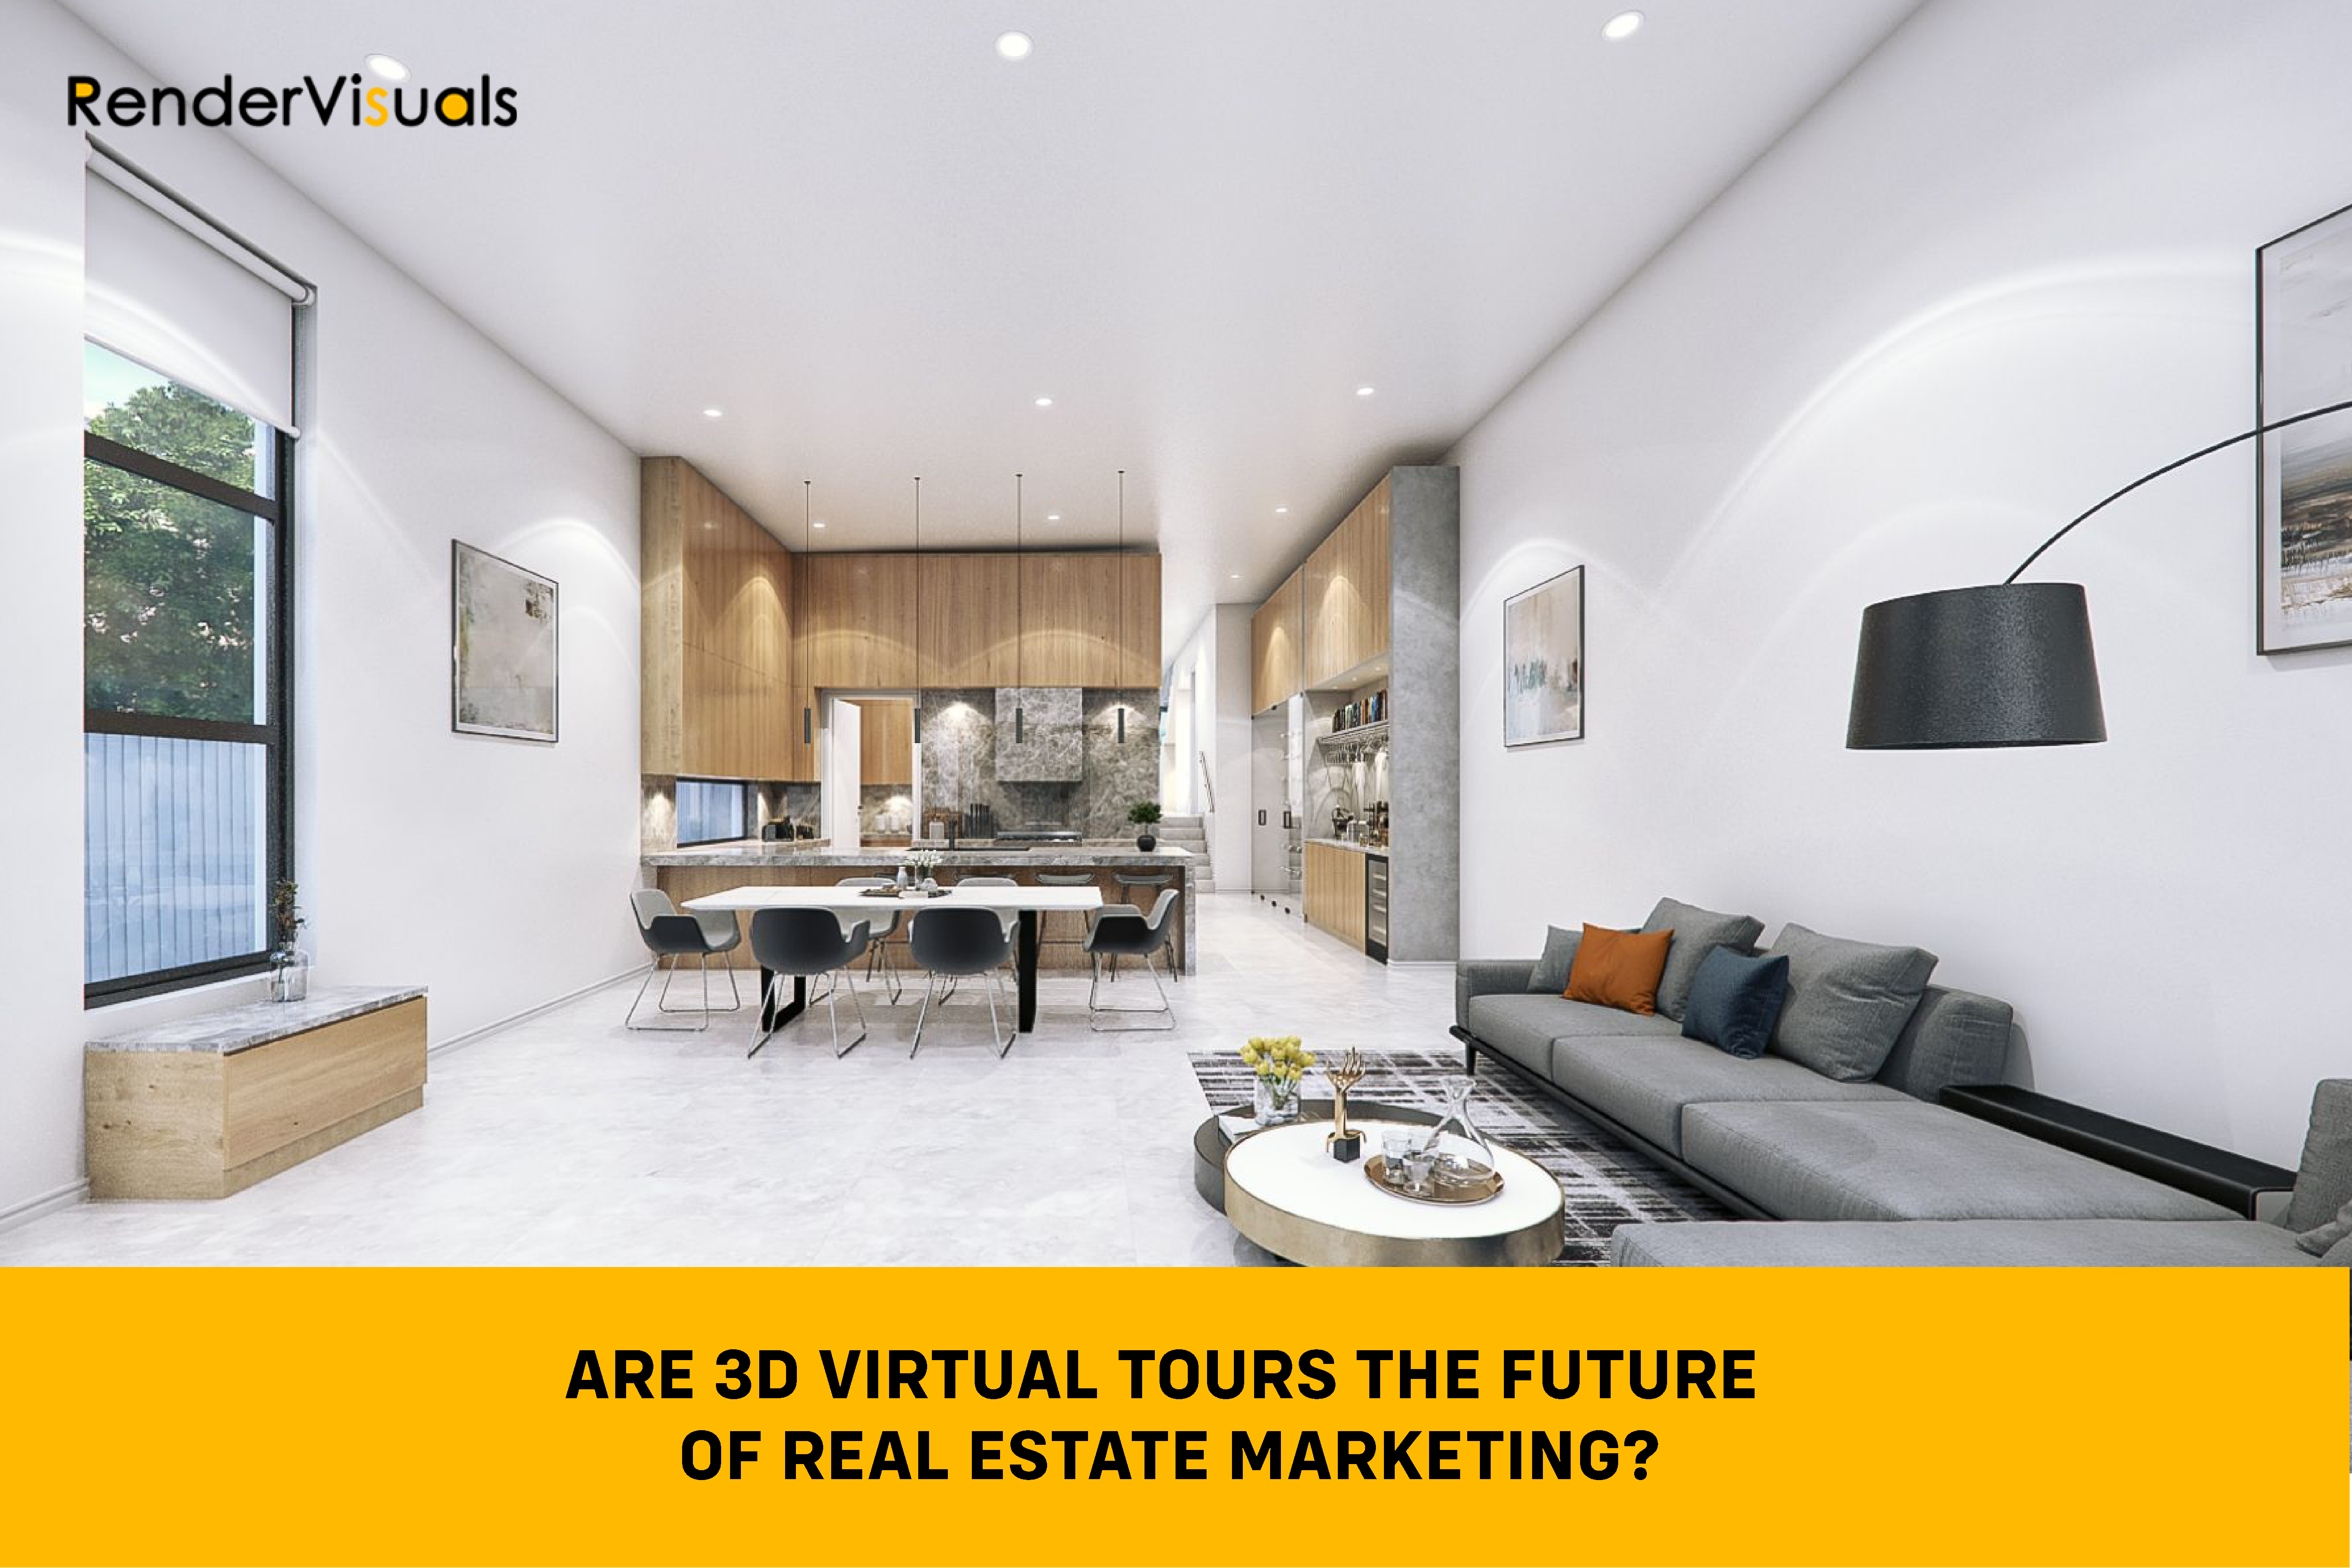 Are 3D Virtual Tours the Future of Real Estate Marketing?